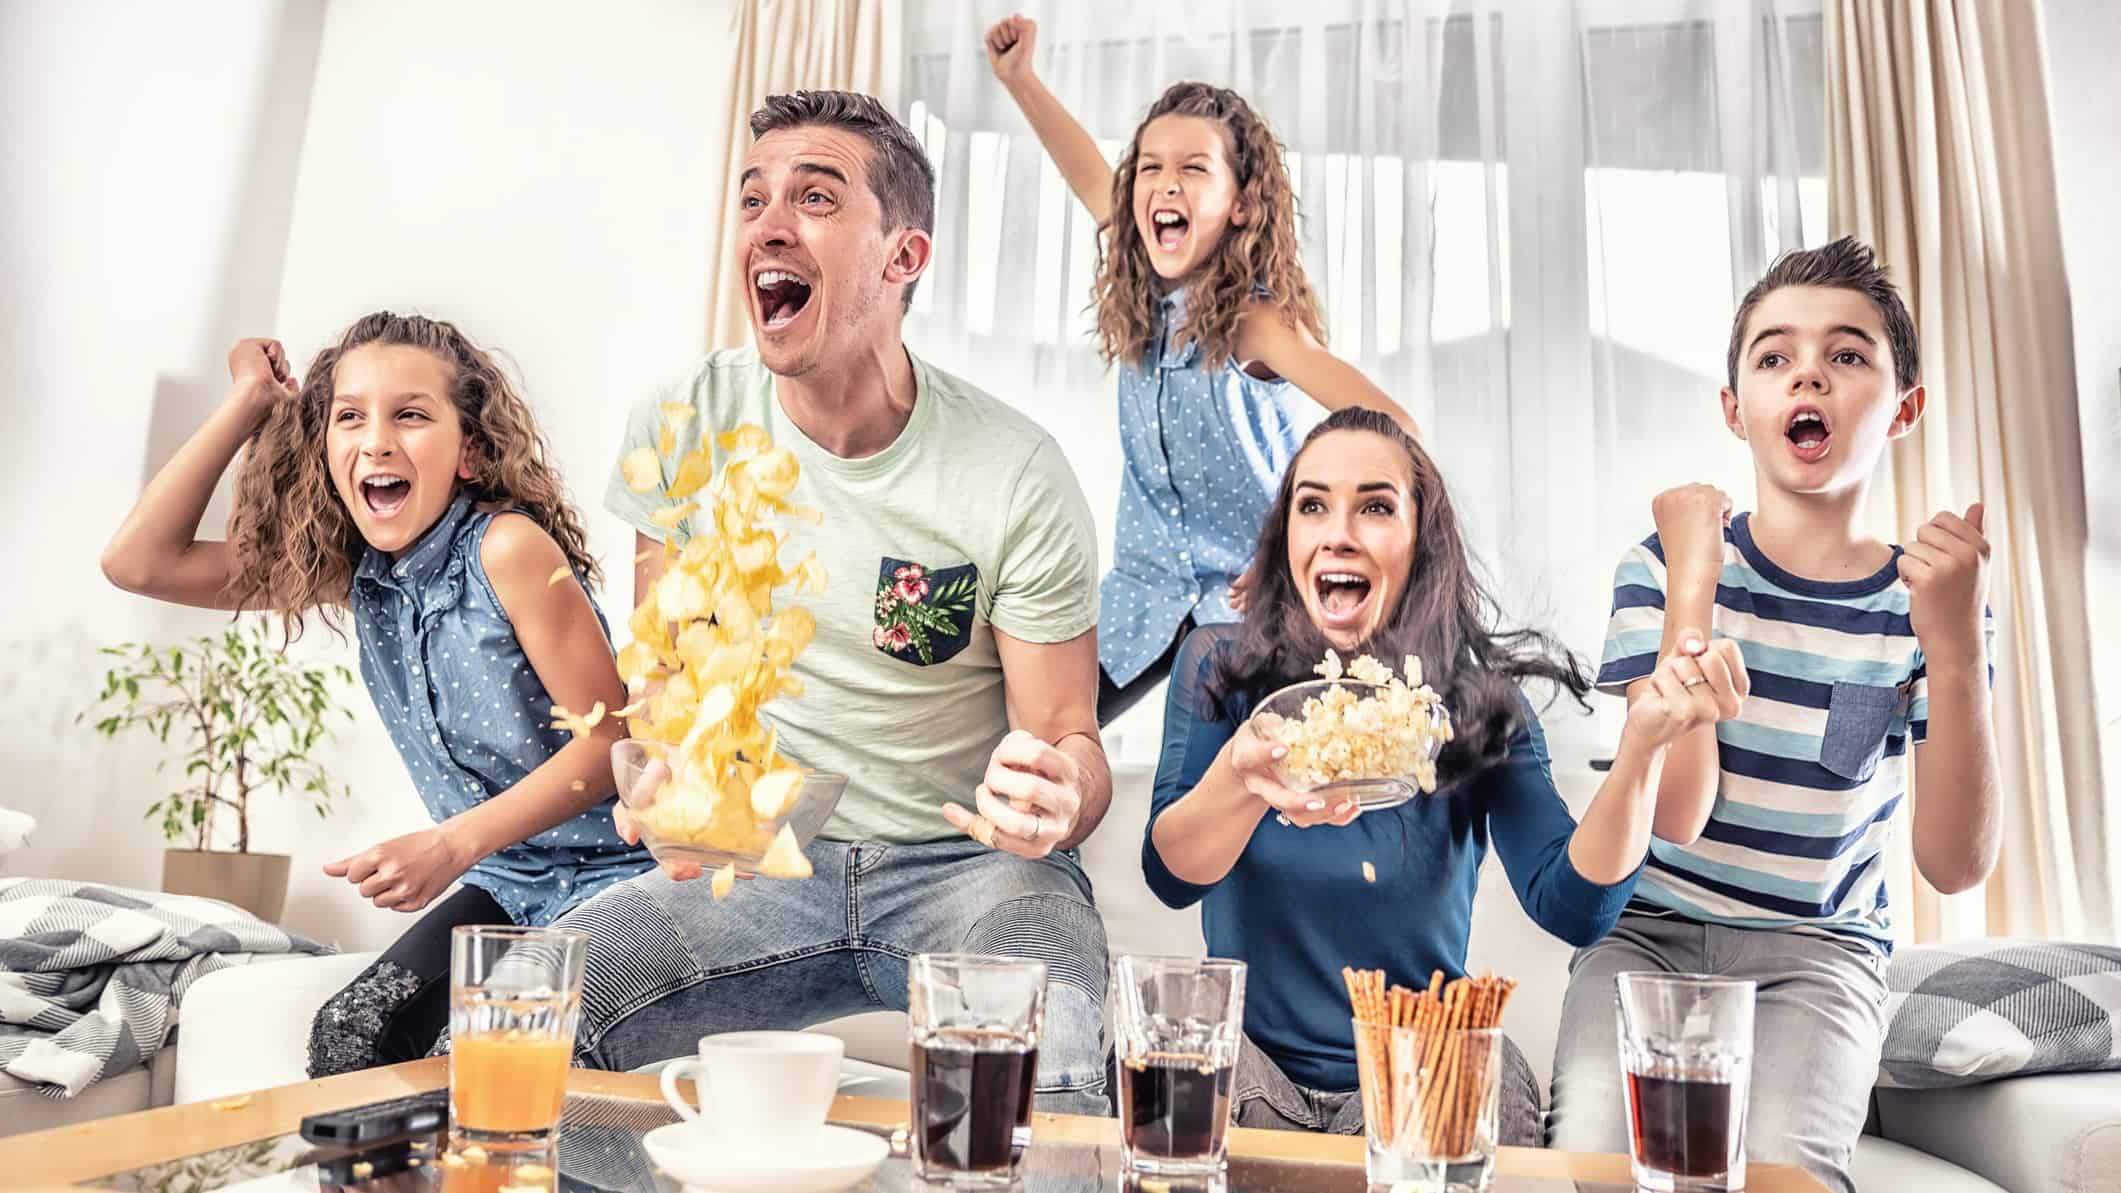 Family jumps up and cheers while watching TV.